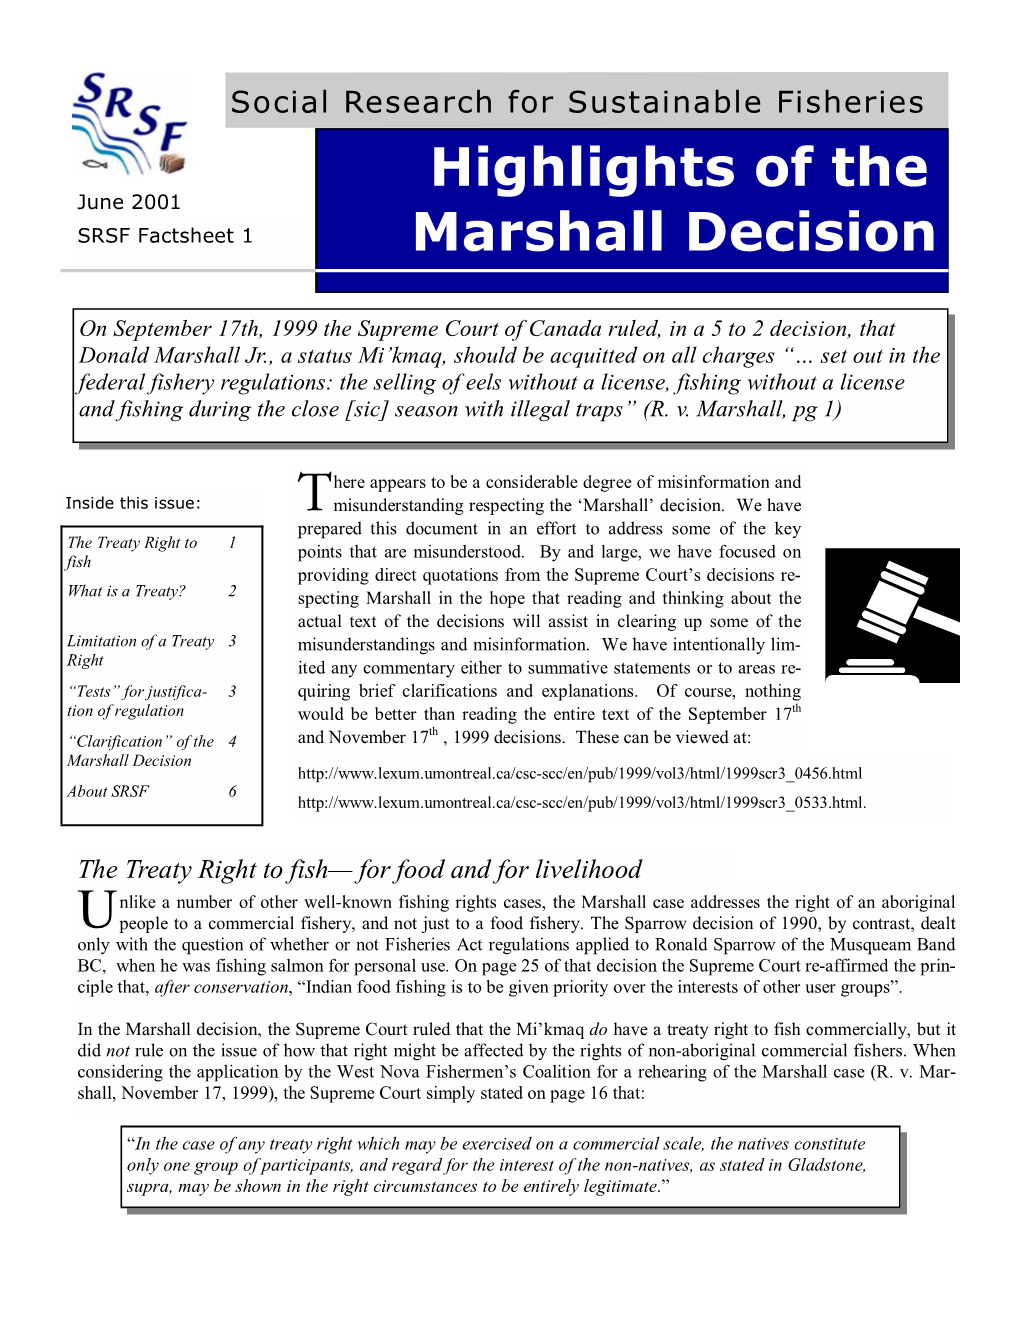 Highlights of the Marshall Decision SRSF Factsheet 1